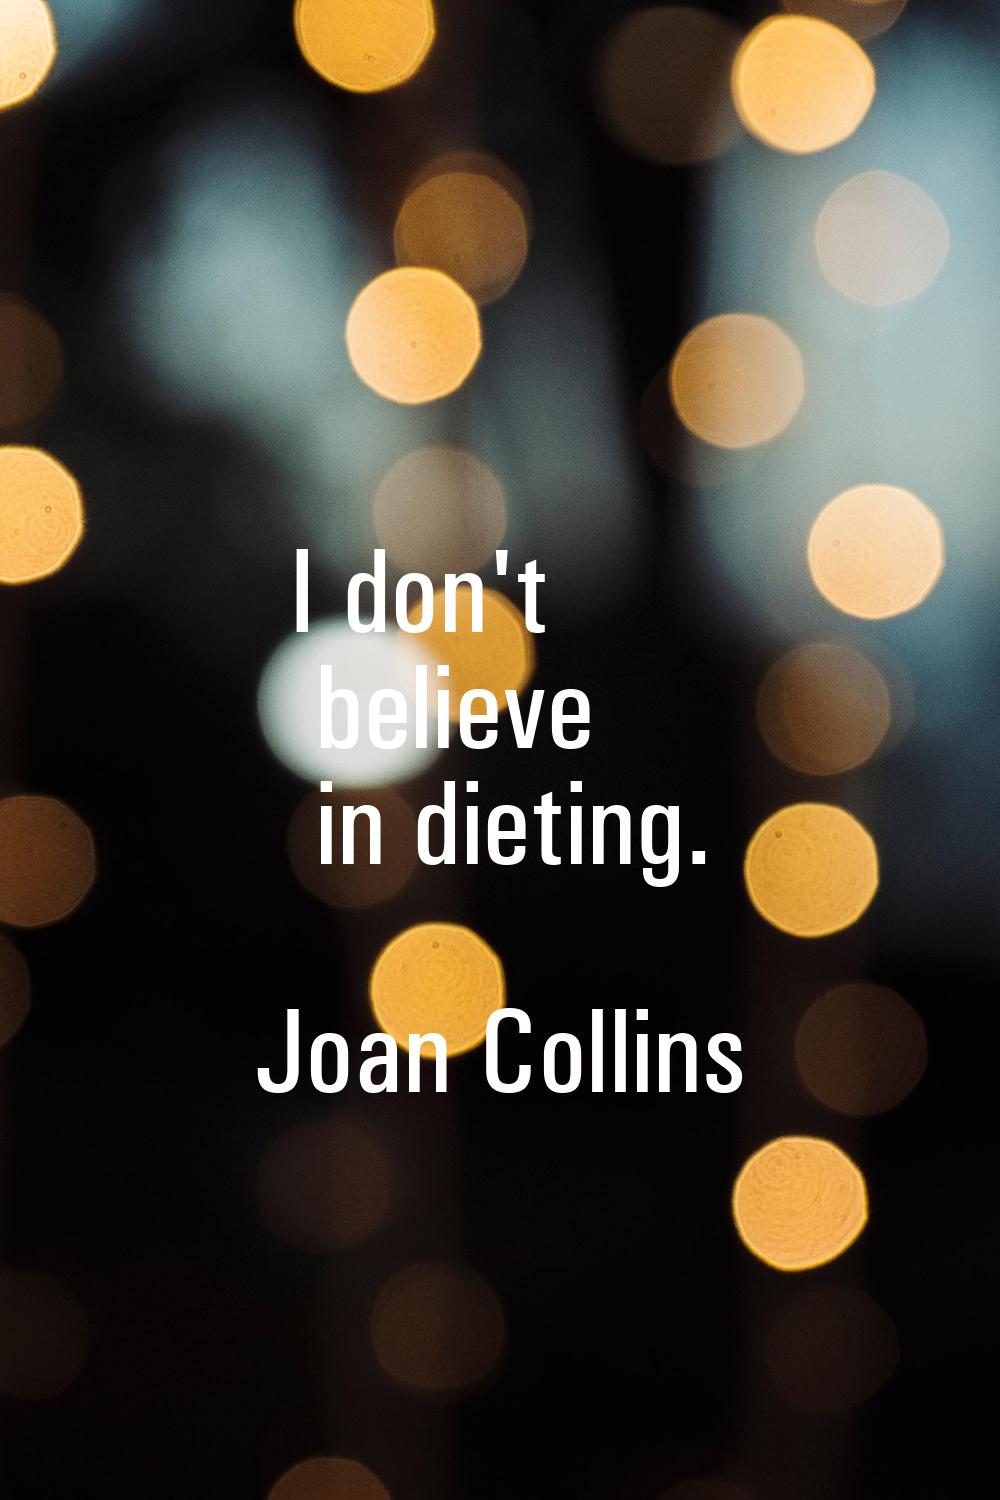 I don't believe in dieting.